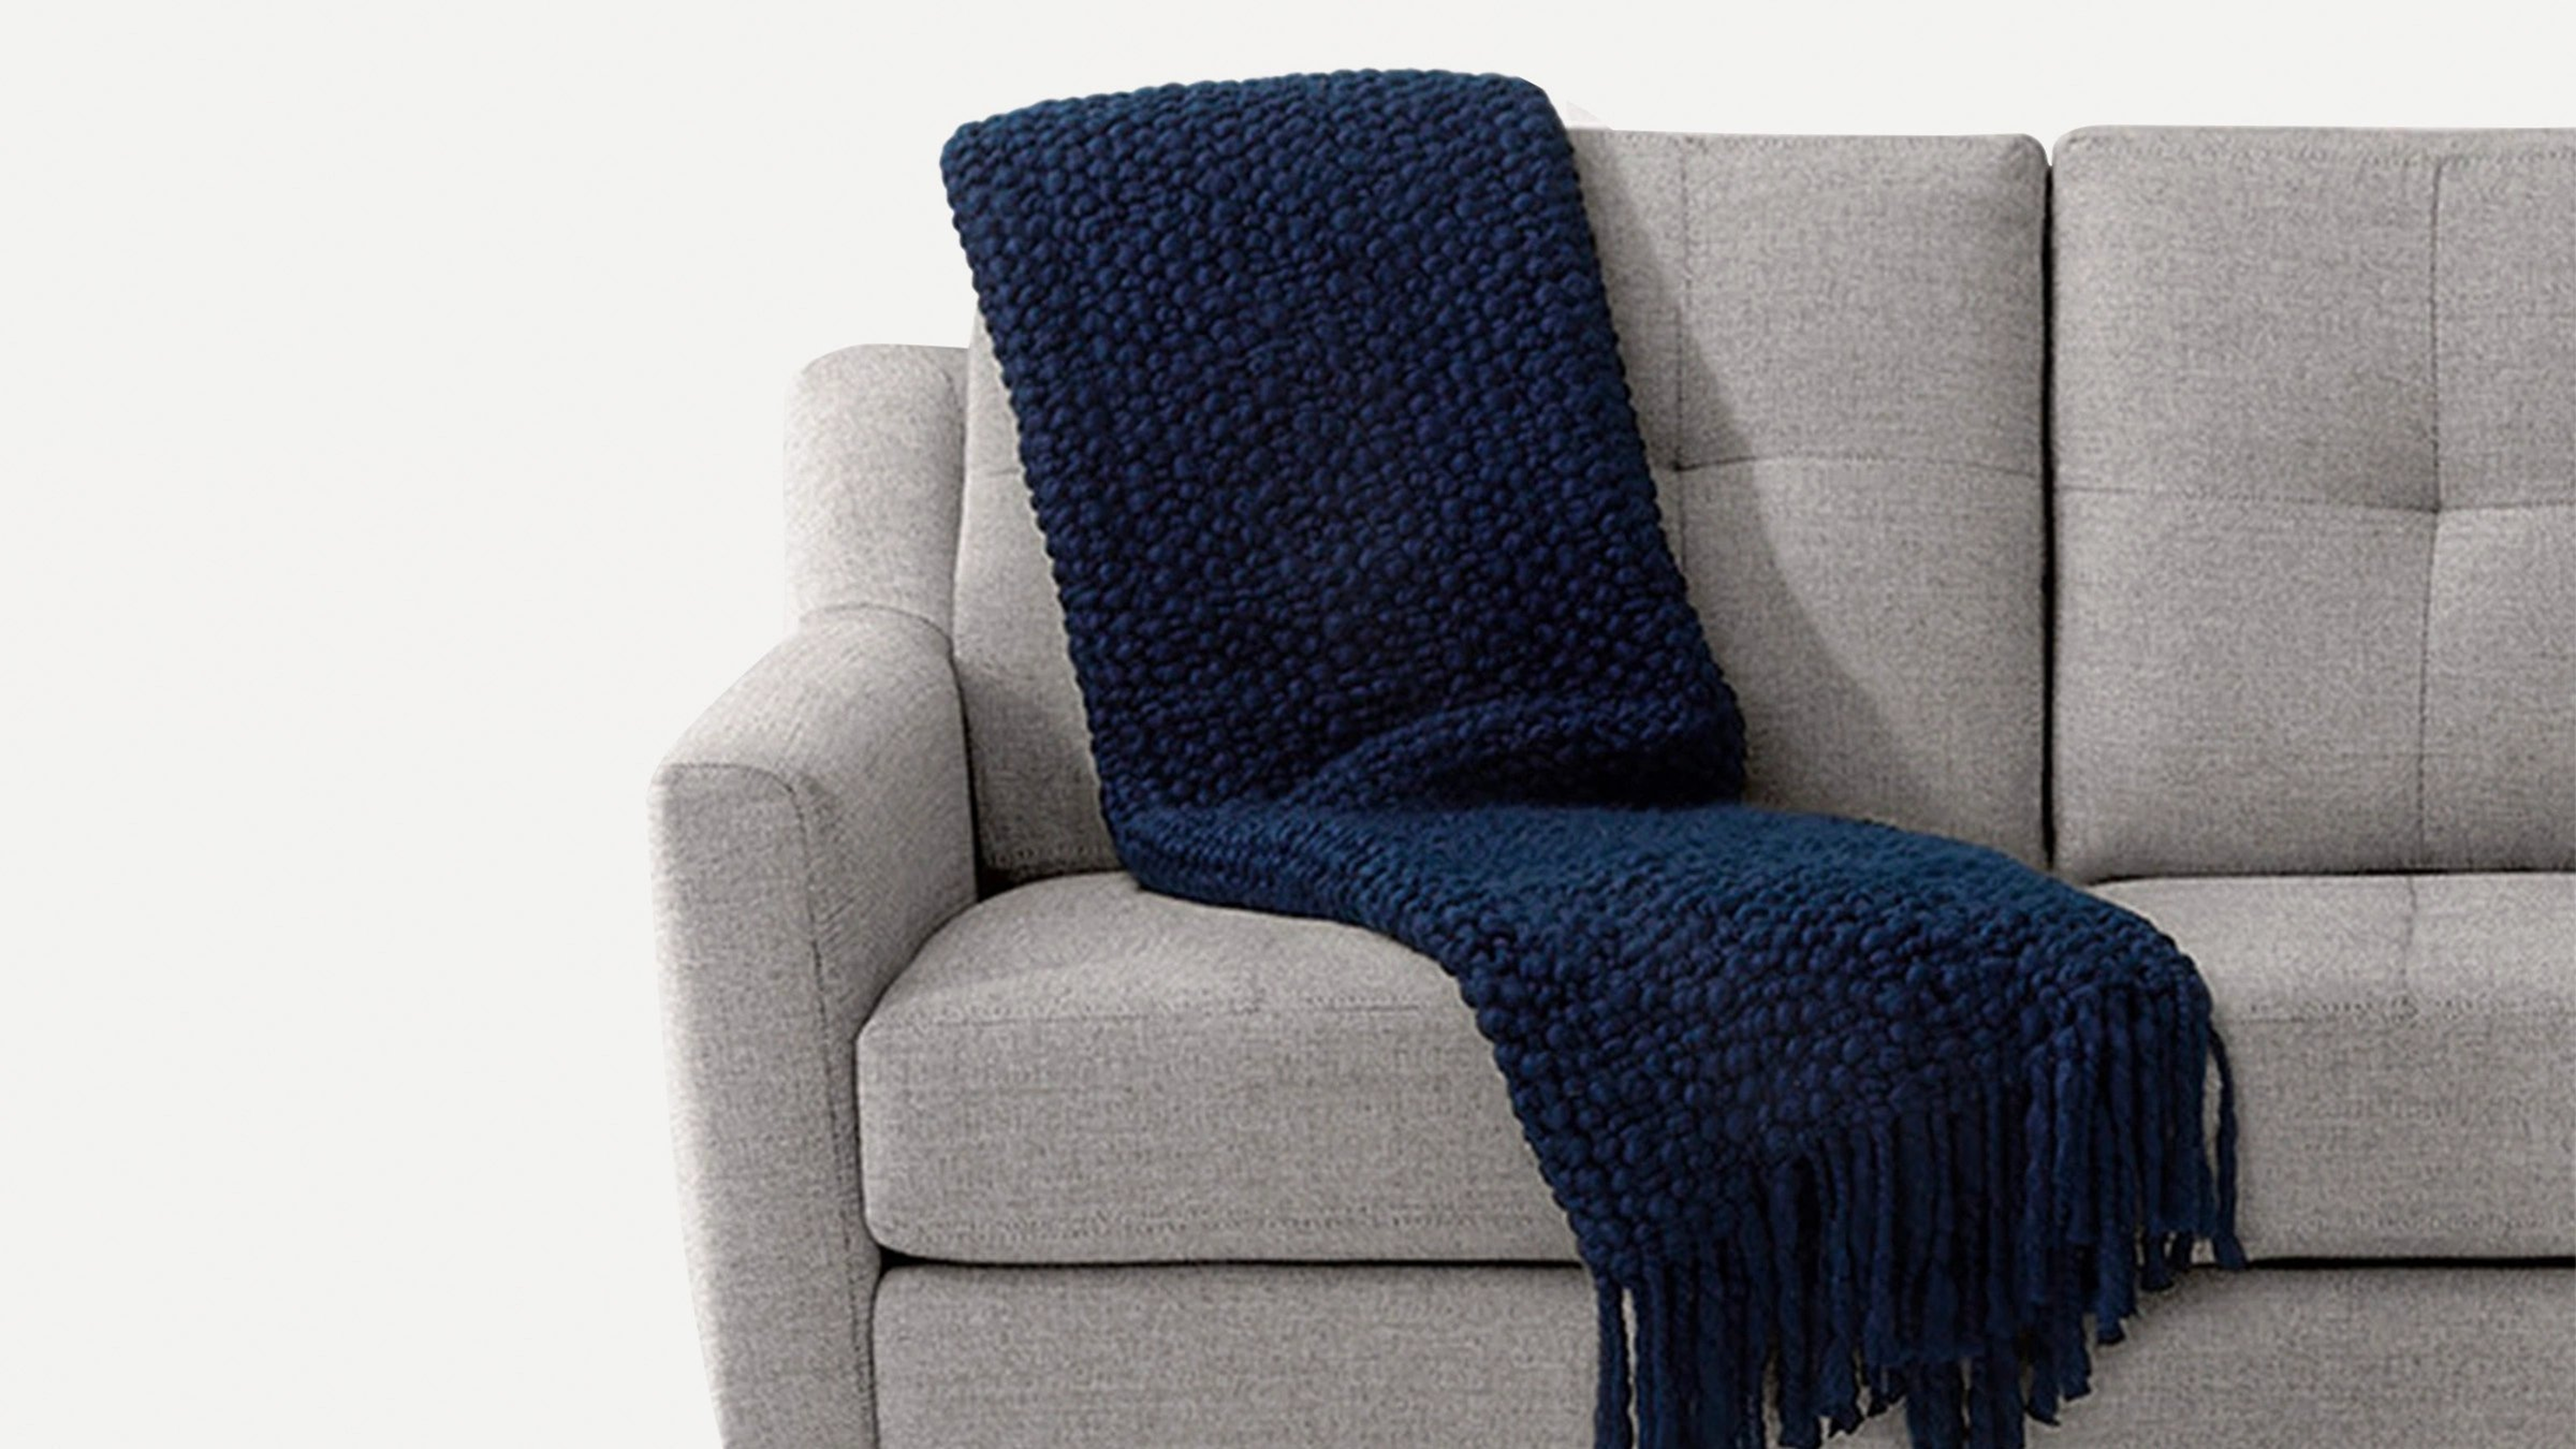 The Navy Essential Hand-Woven Throw Blanket Blanket in Mixed - Burrow